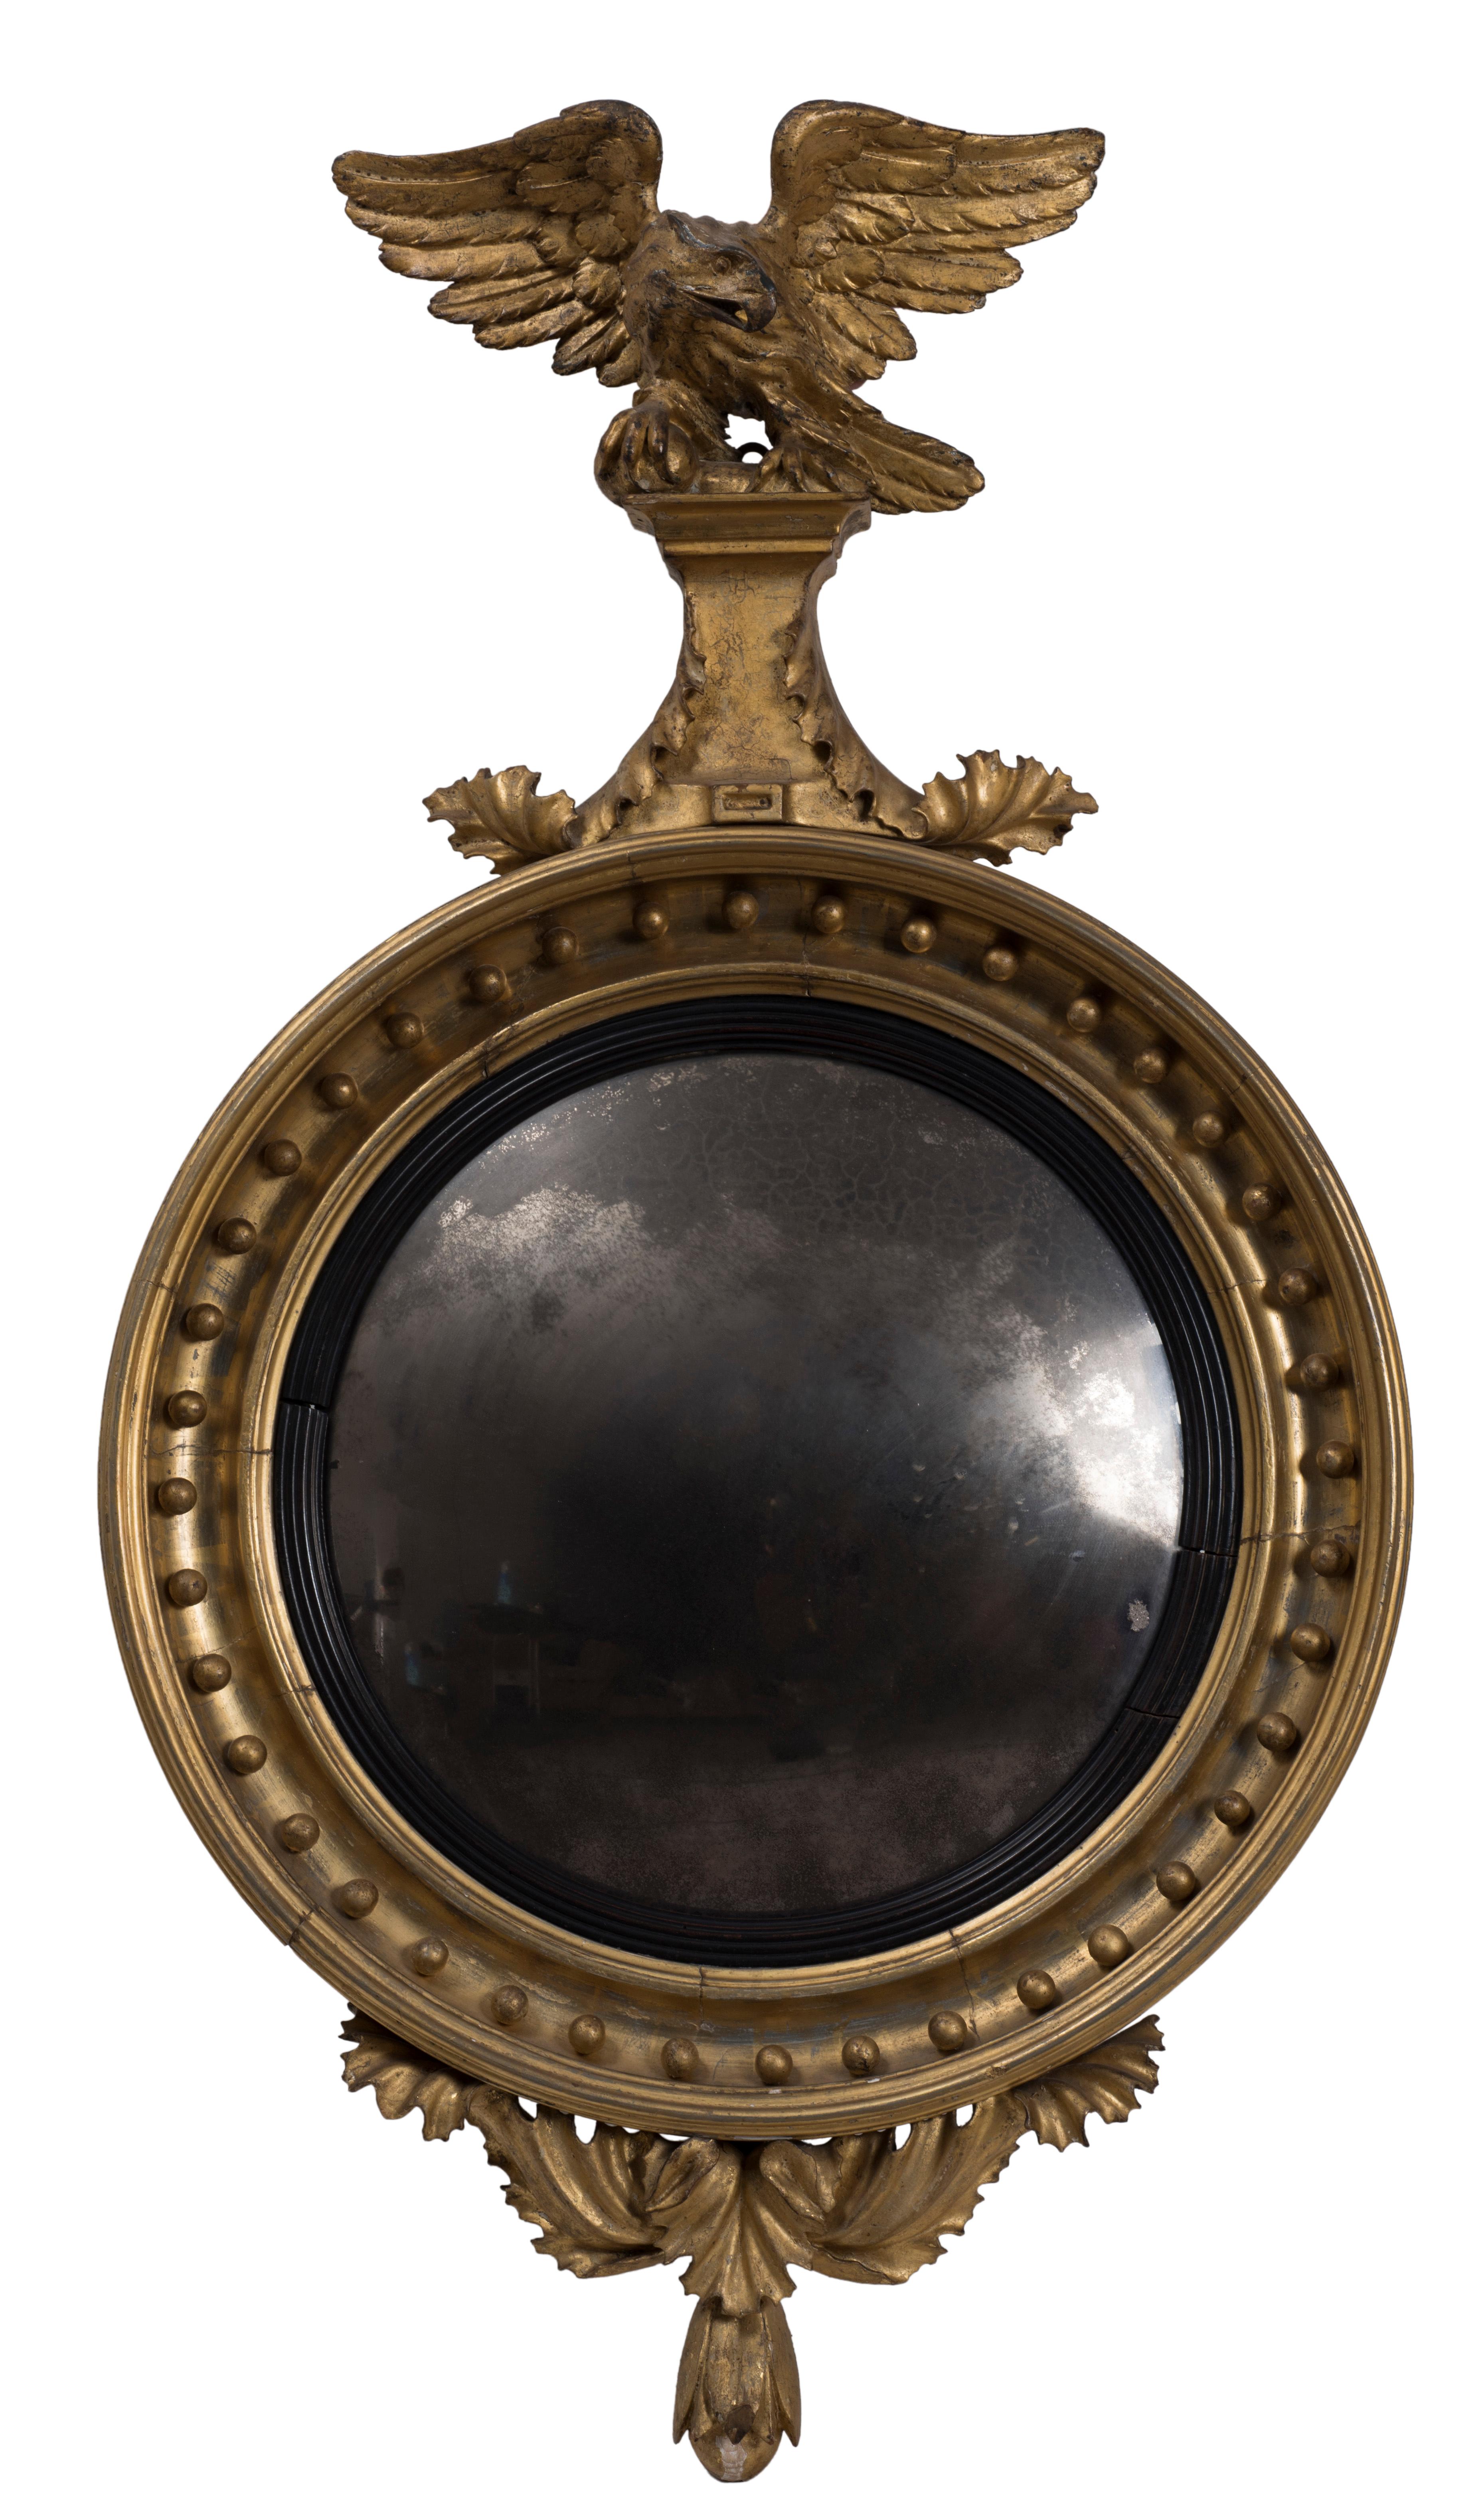 This Regency era wall mirror is a very elegant gilded wooden wall mirror. It was realized during the famous Regency era, noticed for its elegance and achievements in fine arts and architecture.

A majestic eagle surmounts the mirror.

Loss of